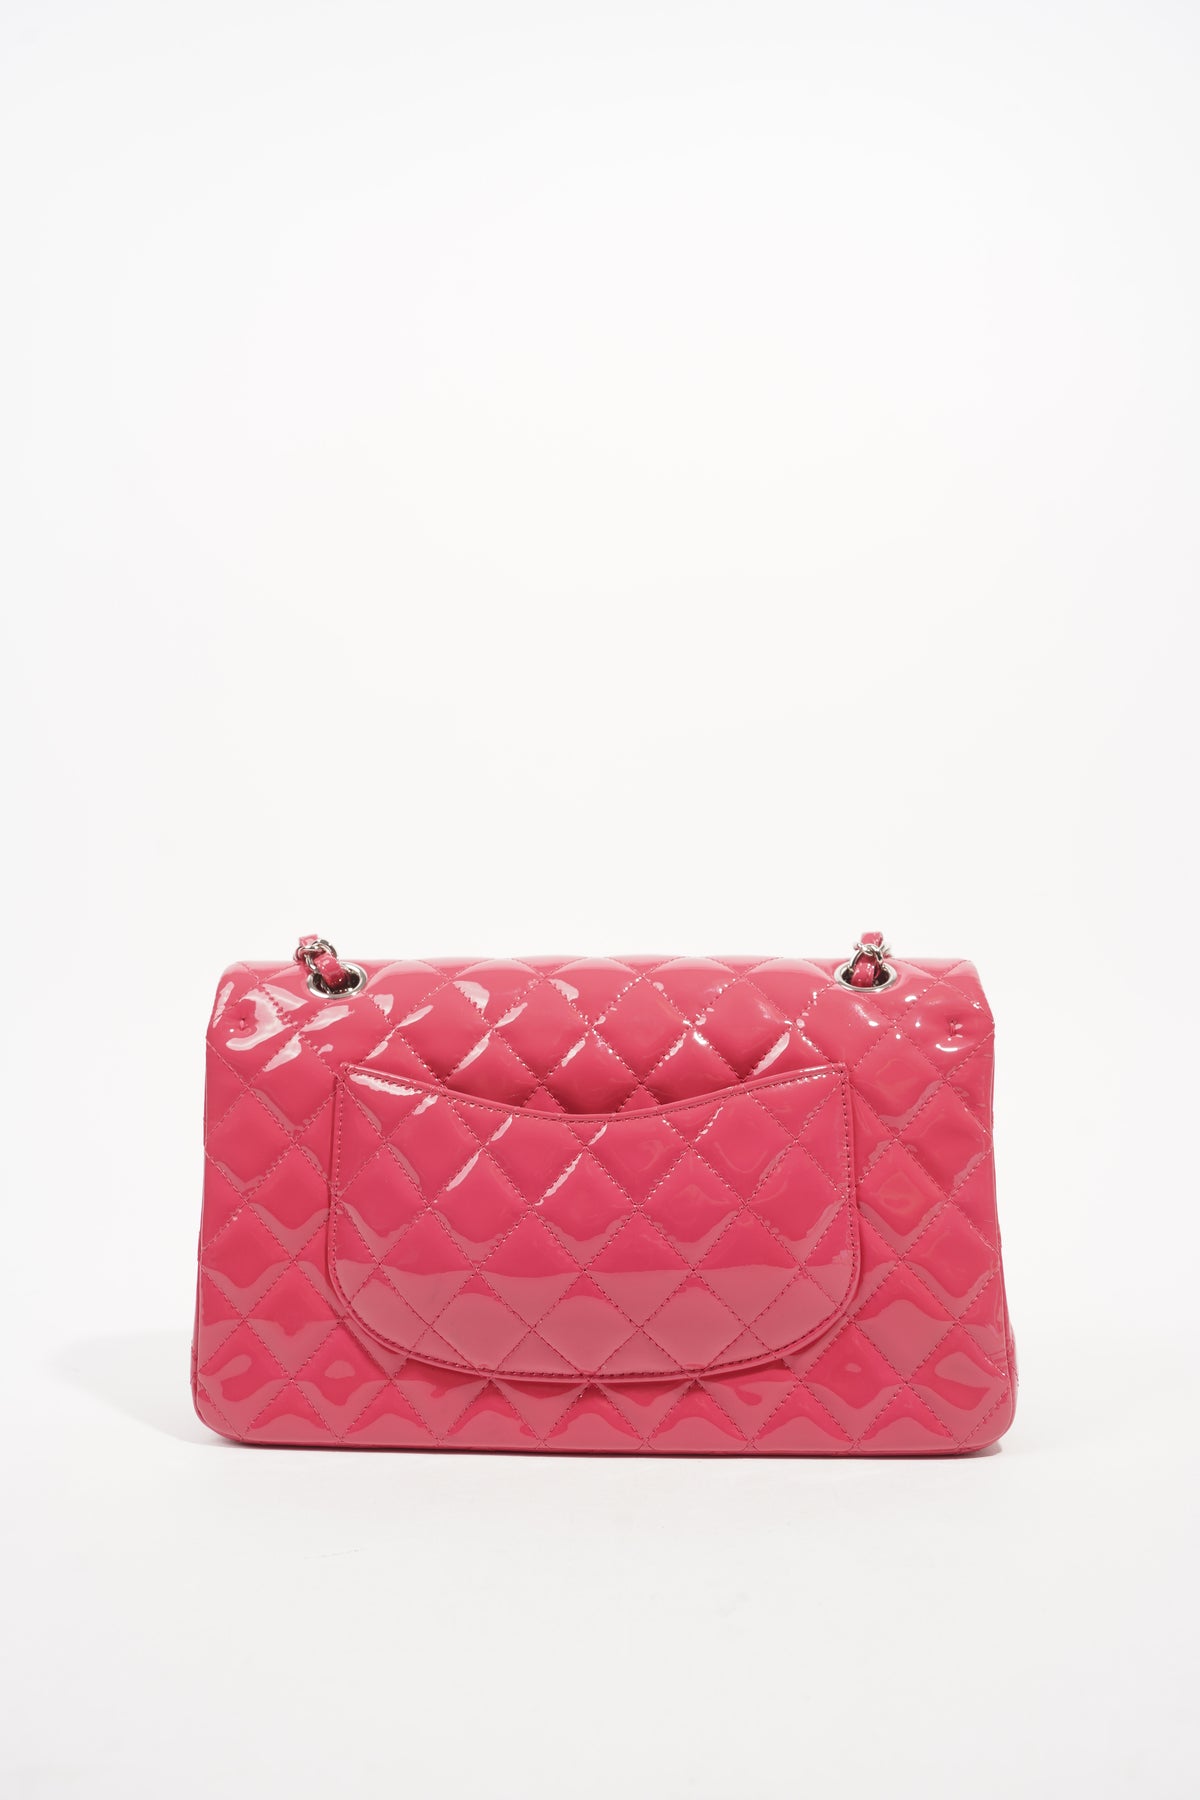 Chanel Classic Double Flap Bag Quilted Patent Medium Purple 10745718